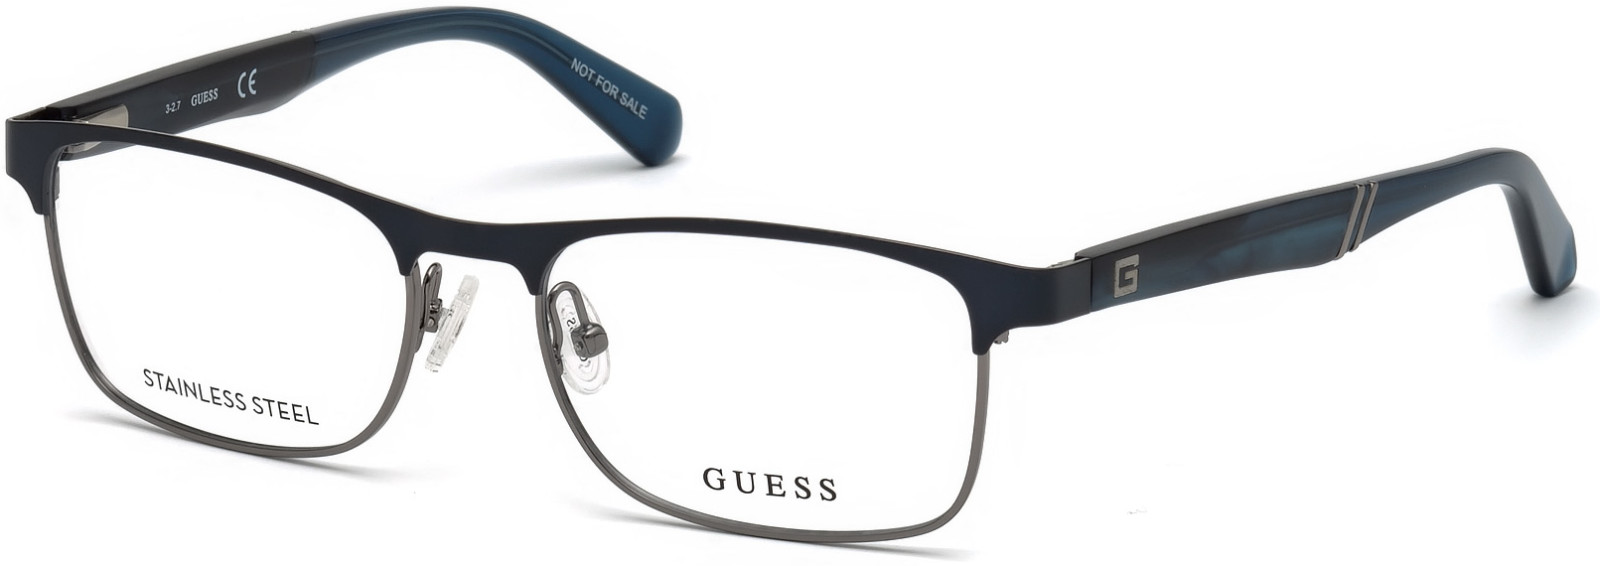 GUESS 1952 091